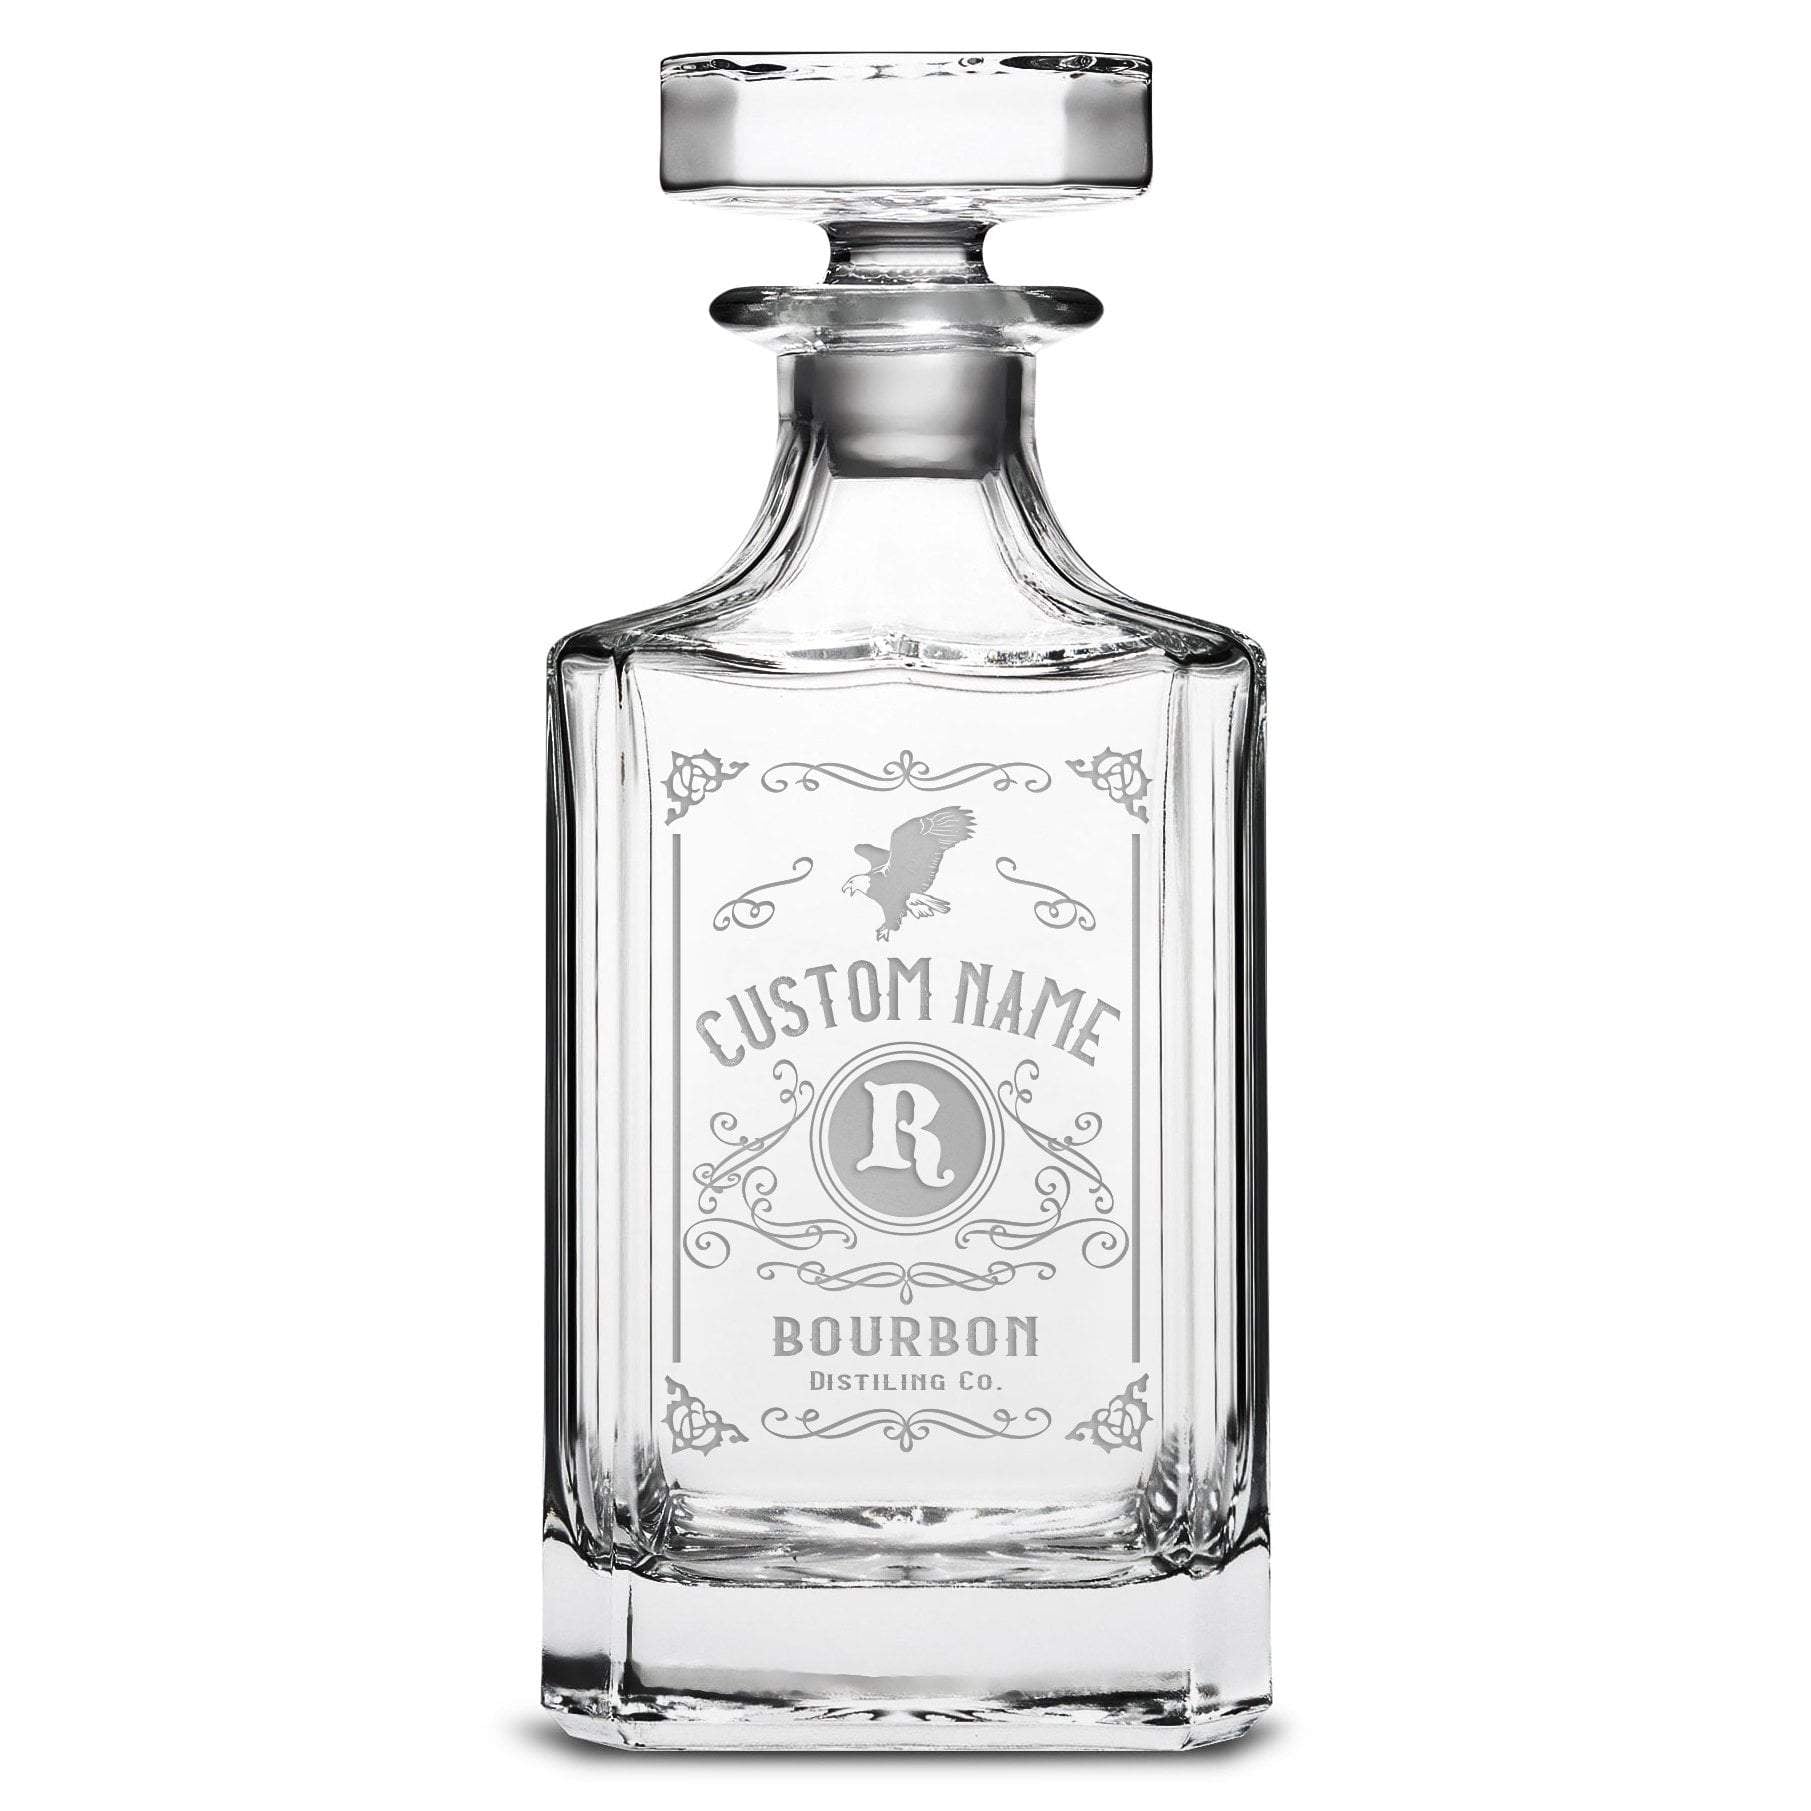 https://cdn.shopify.com/s/files/1/1400/5987/products/deep-etched-no-color-freedom-bourbon-refillable-diamond-decanter-750ml-integrity-bottles-14736234020963_2000x.jpg?v=1587242623